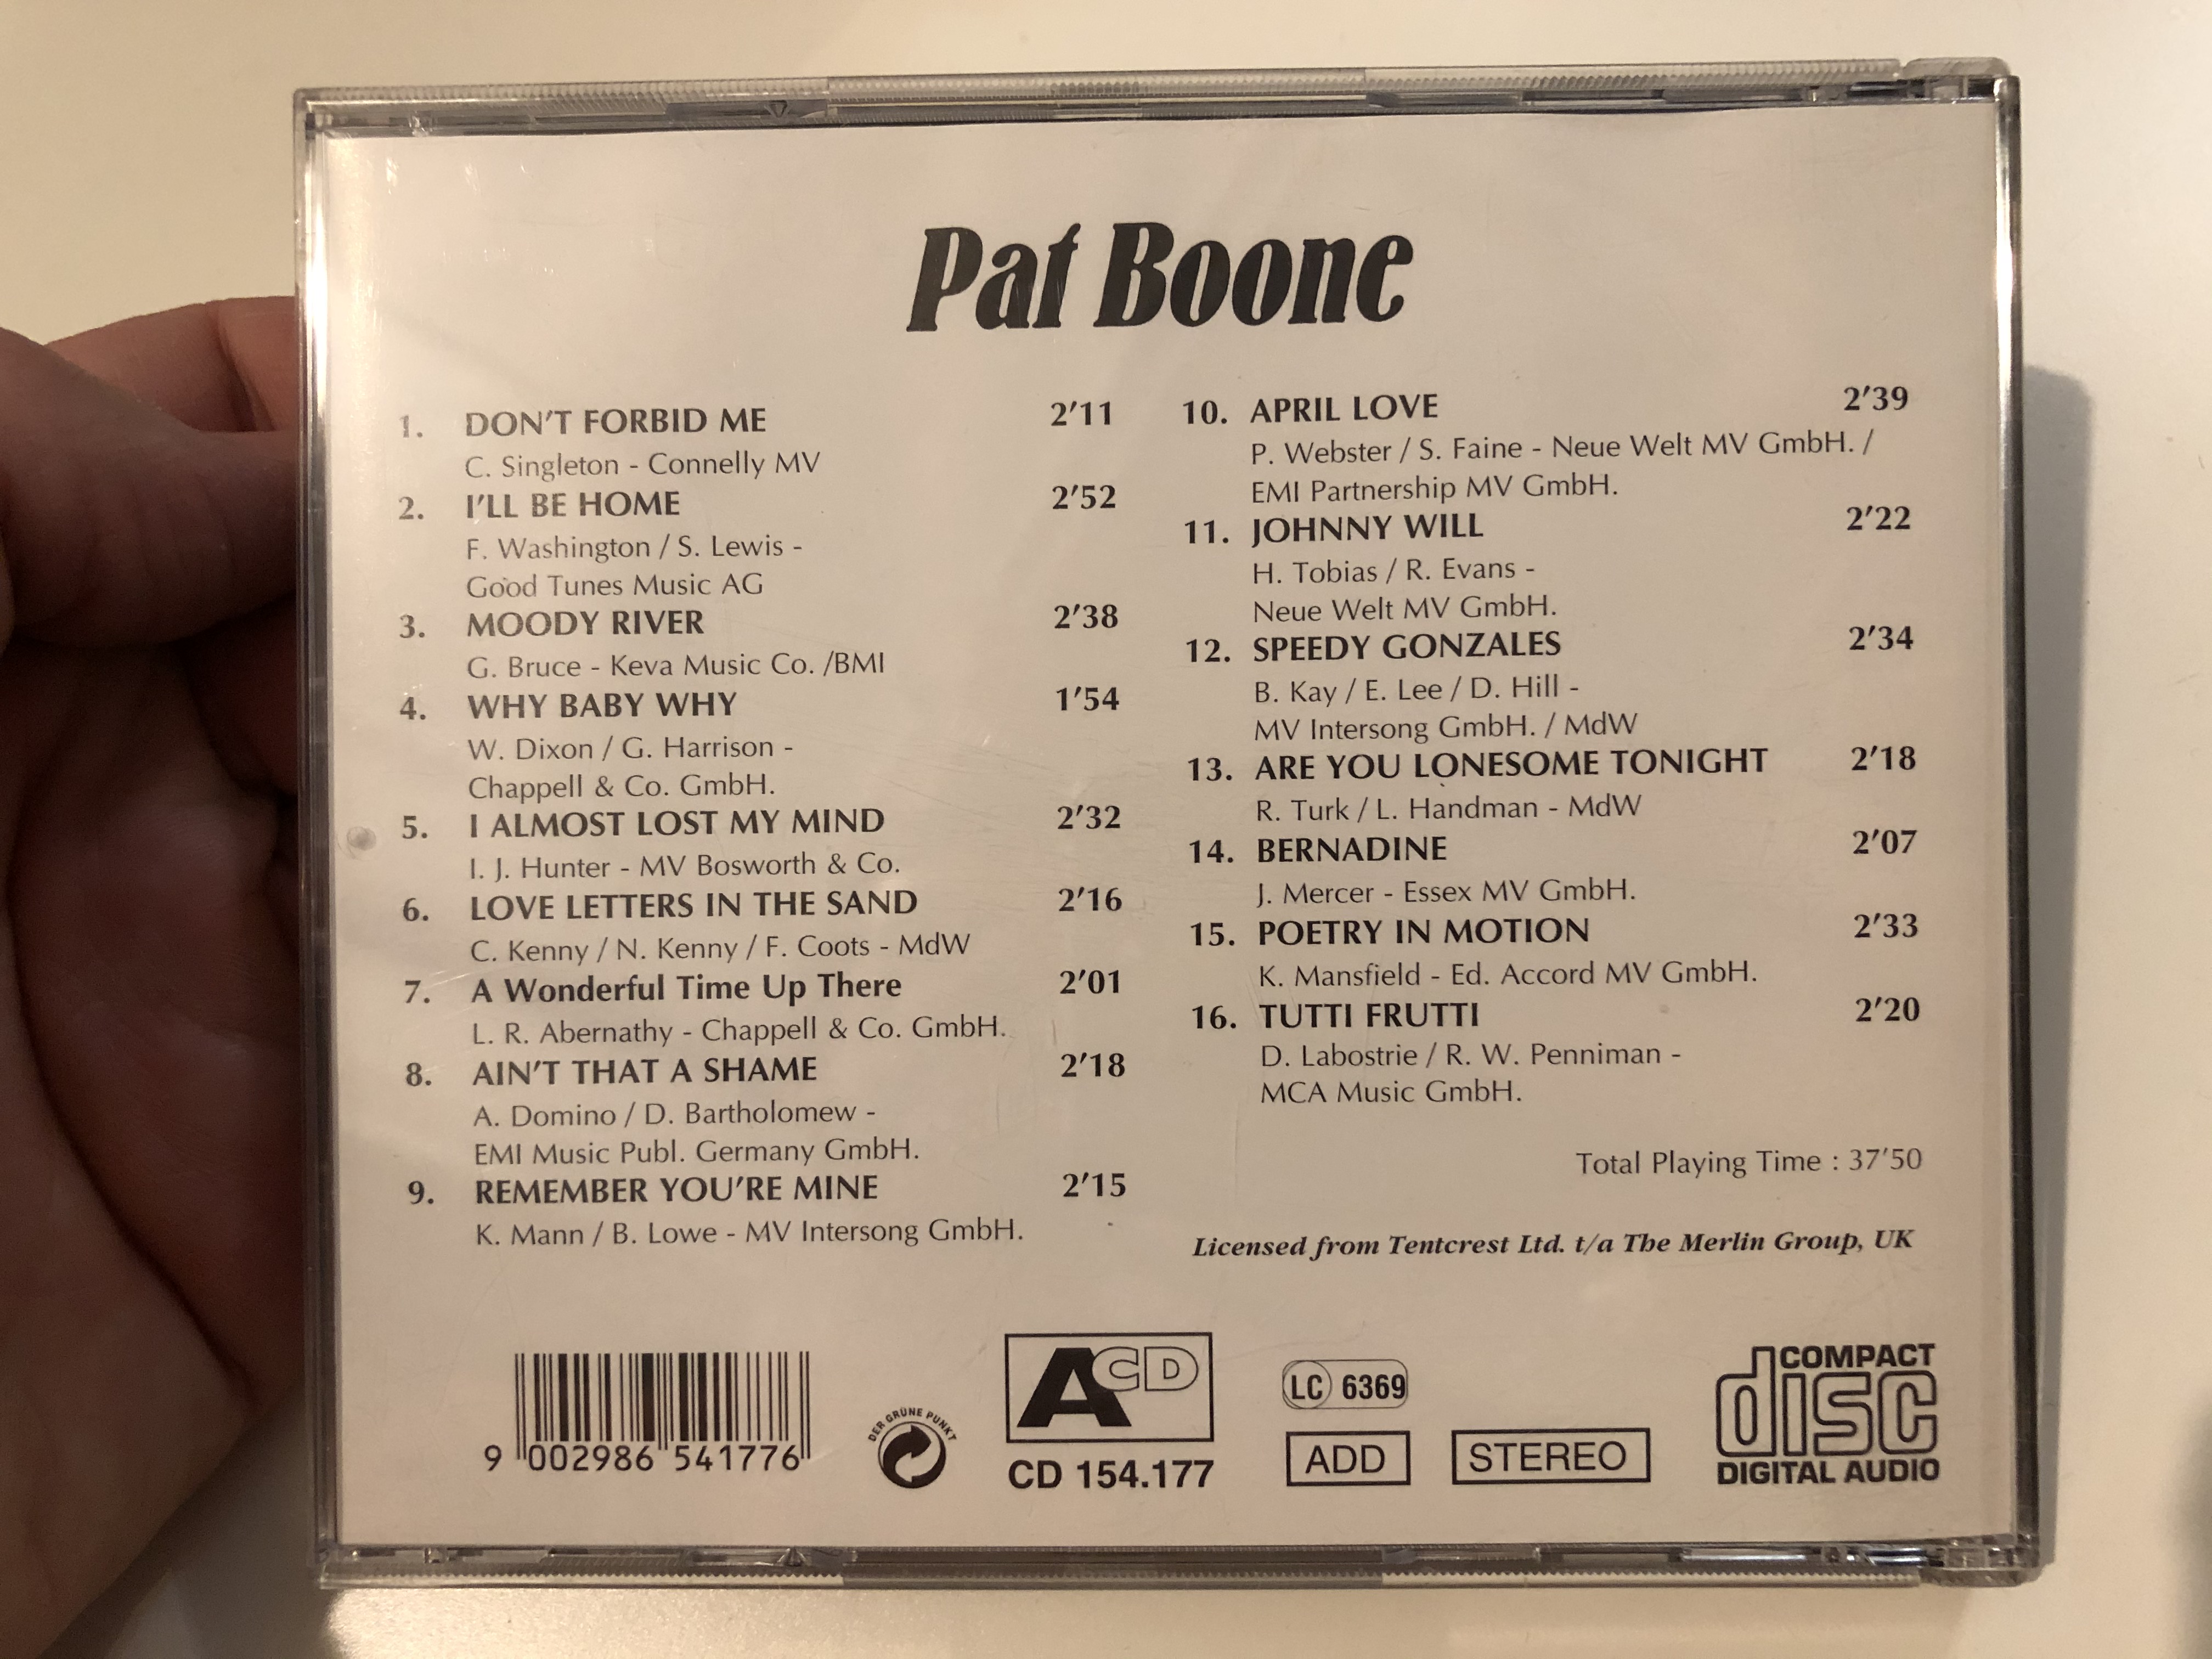 pat-boone-love-letters-in-the-sand-are-you-lonesome-tonight-i-ll-be-home-april-love-speedy-gonzales-johnny-will-a.m.m.-acd-audio-cd-stereo-cd-154-2-.jpg